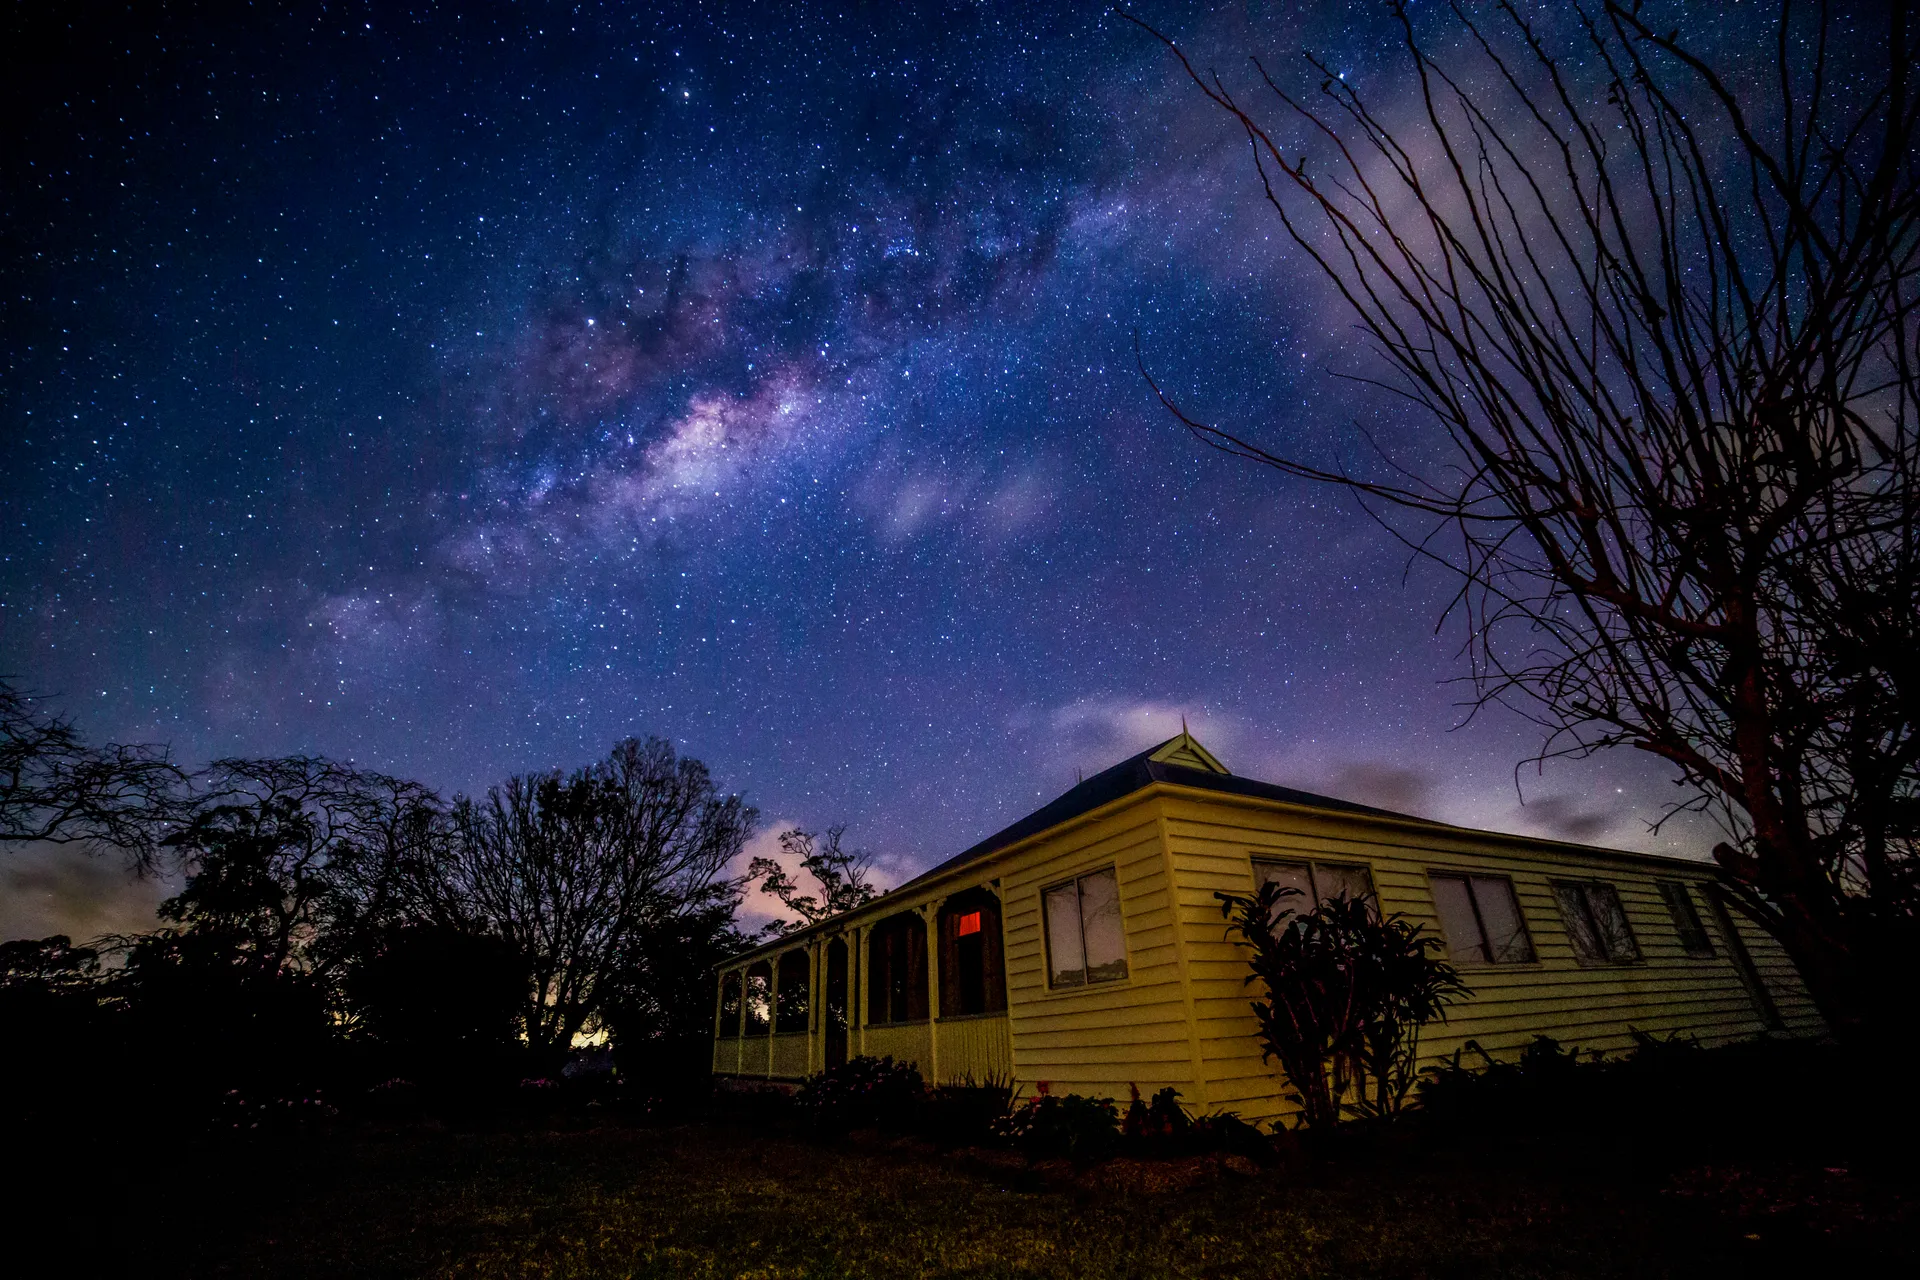 The night sky at the heritage-listed Pattemore House in Maleny. Image credit: Dr Ken Wishaw and Dr Paul Baker, Brisbane Astronomical Society.